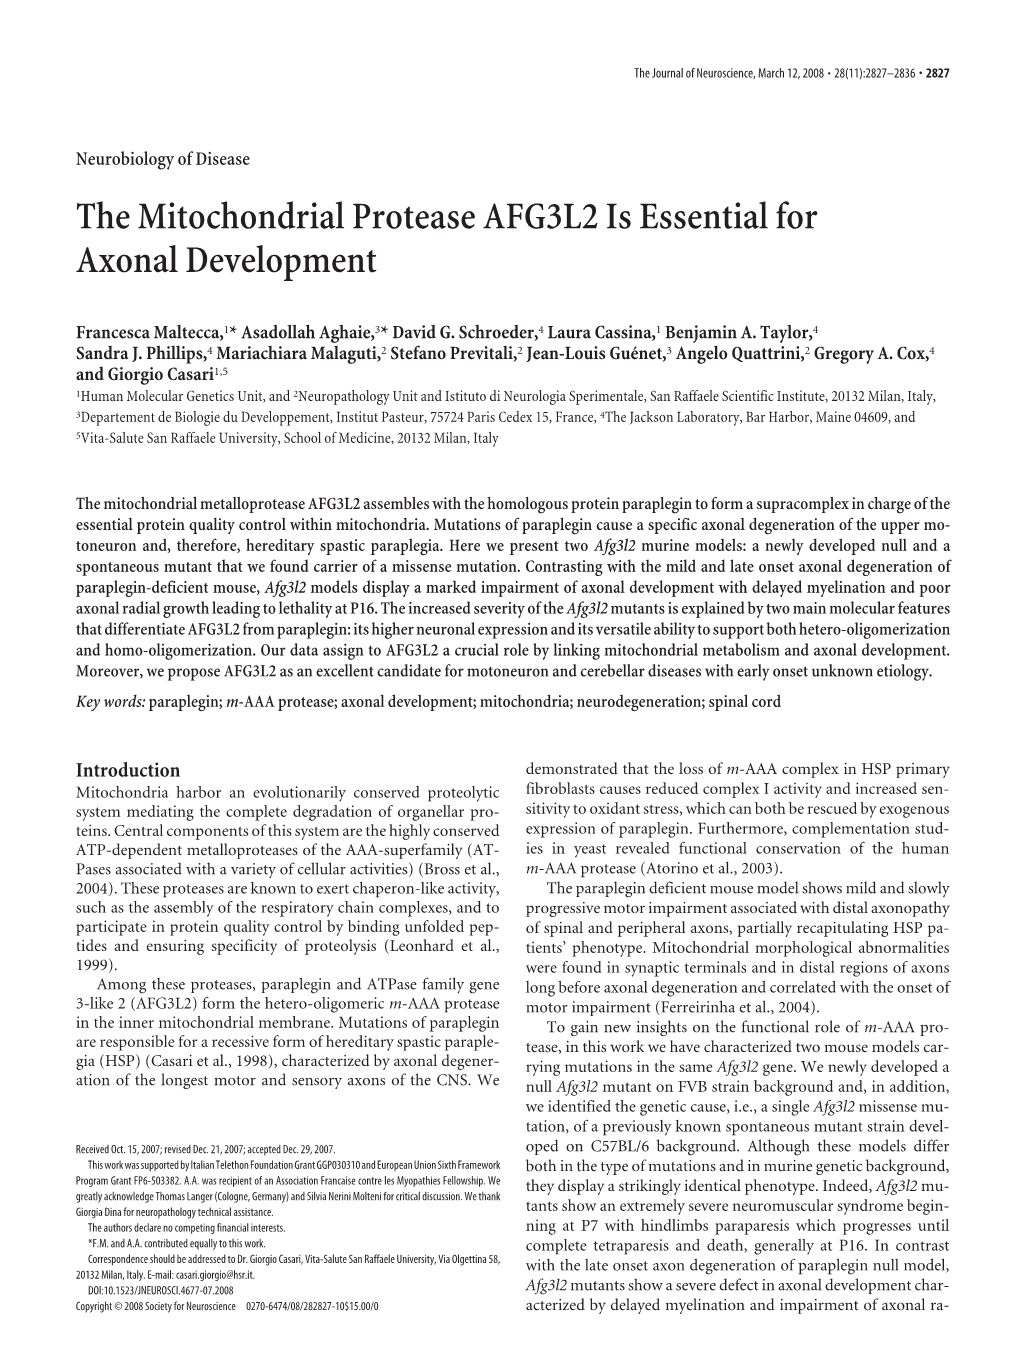 The Mitochondrial Protease AFG3L2 Is Essential for Axonal Development